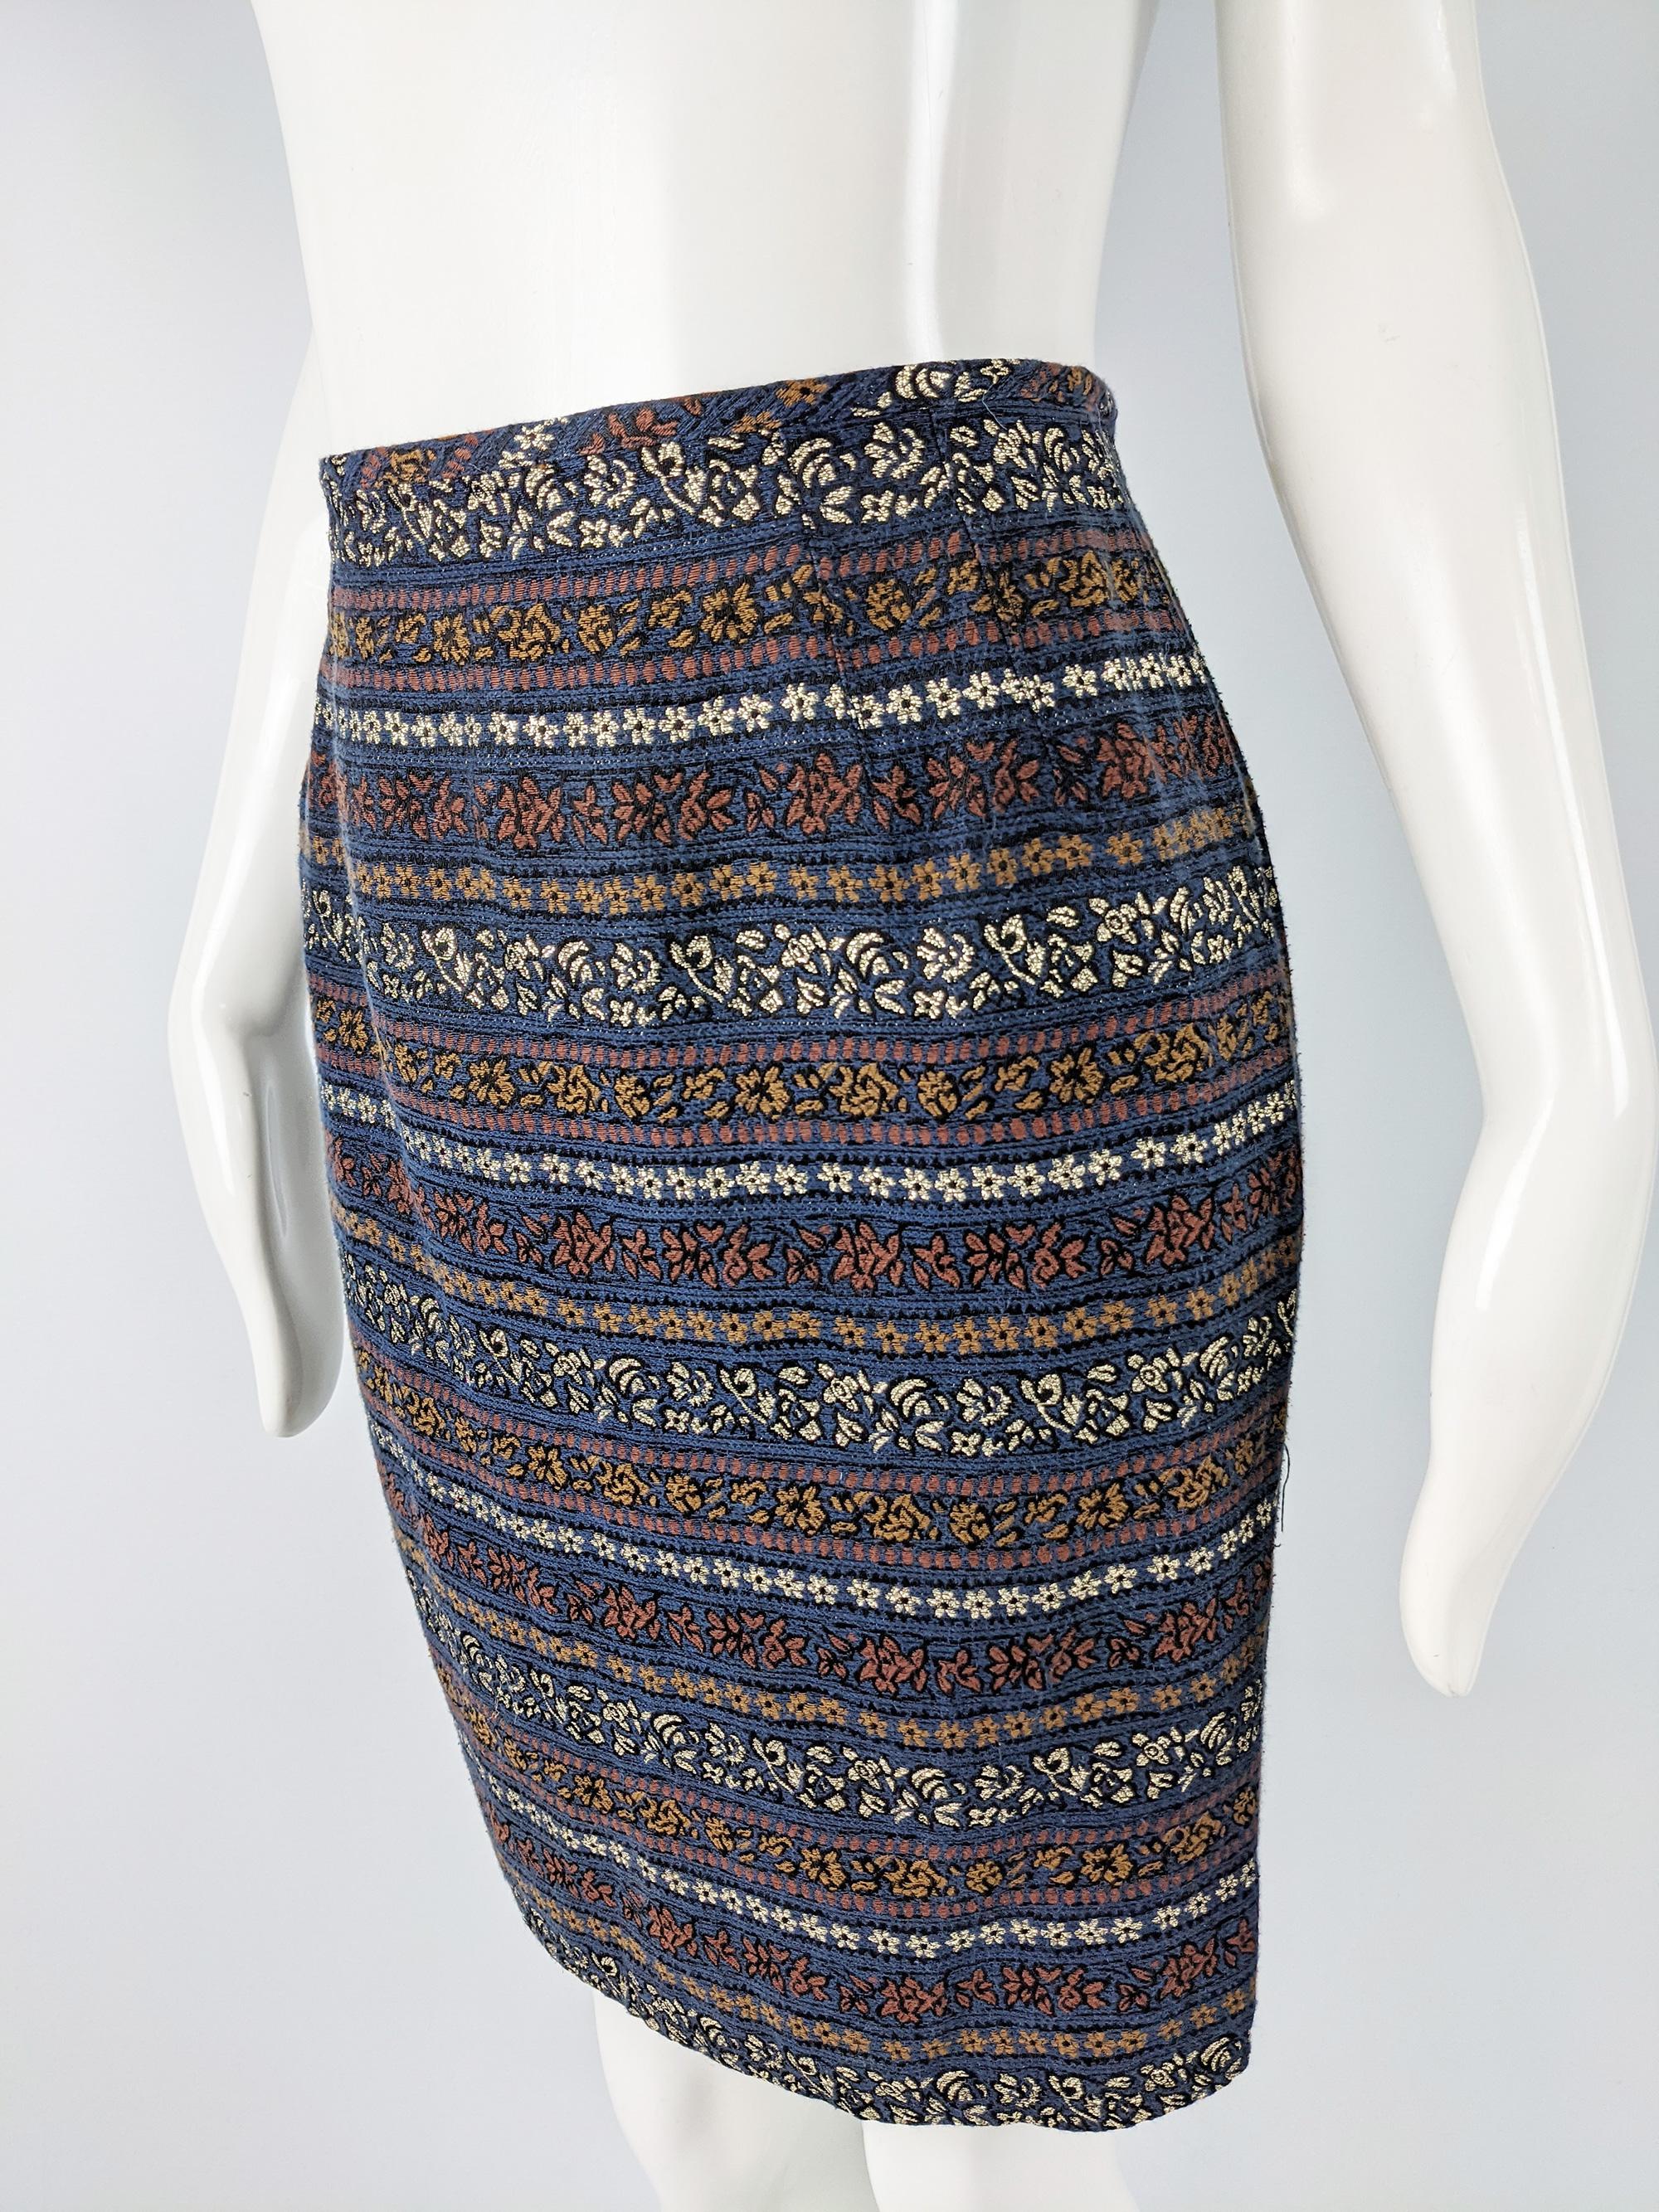 Women's or Men's Jean Paul Gaultier Vintage Blue & Gold Brocade Party Day to Evening Skirt, 1980s